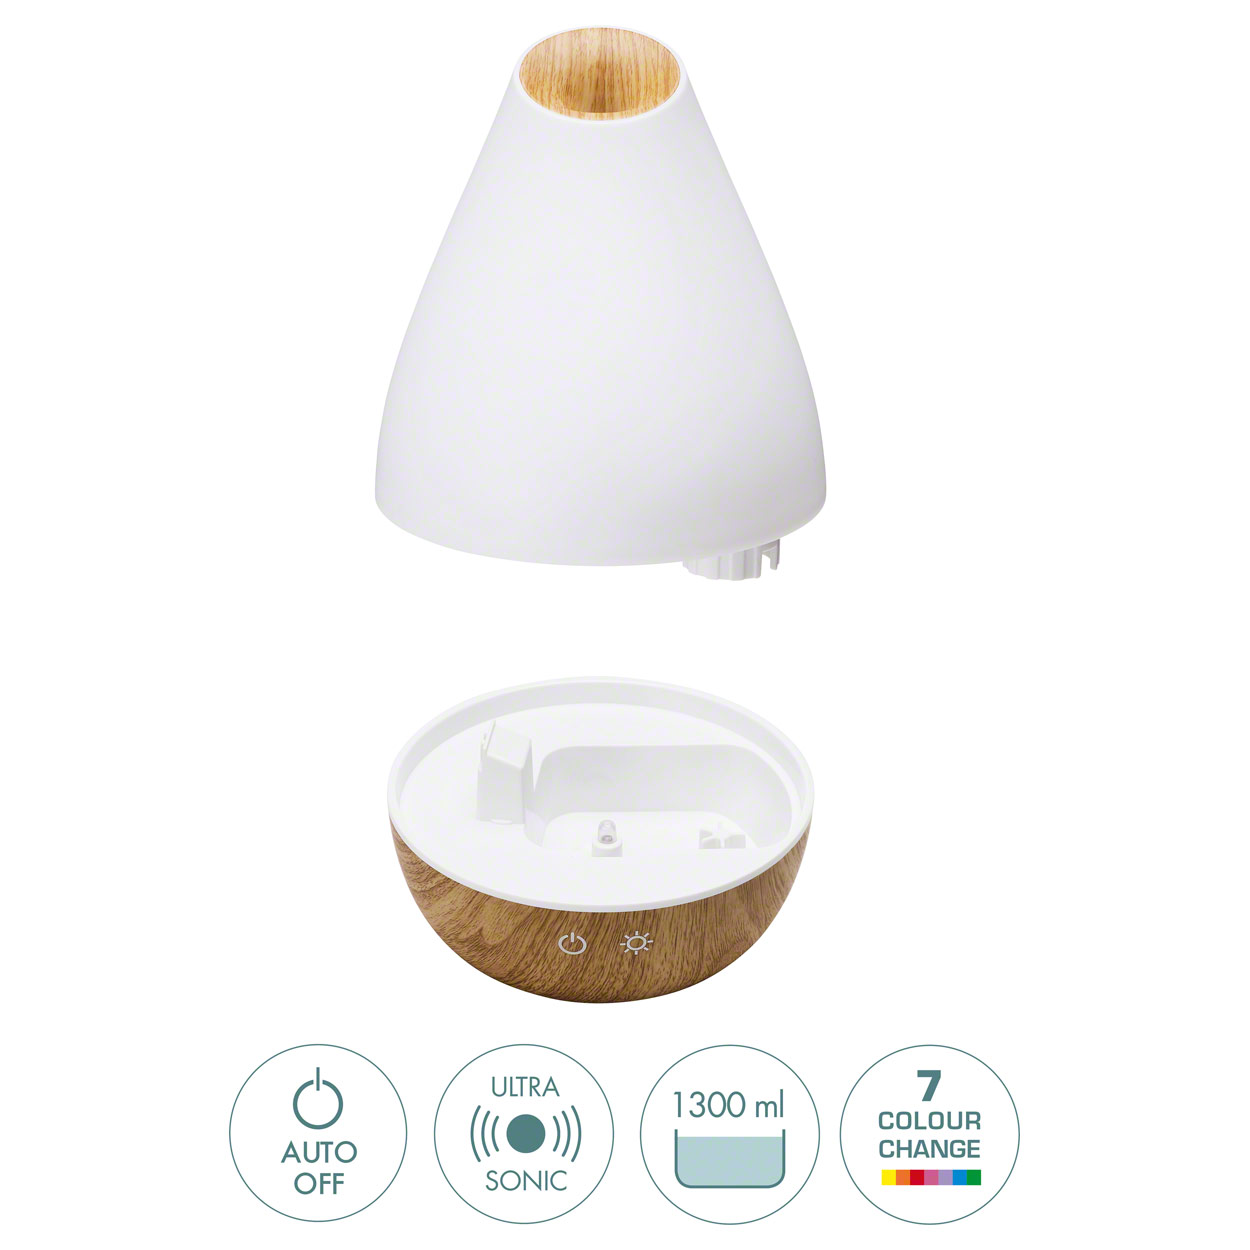 LED-Licht Humidifier Ultraschall Luftbefeuchter Aroma Diffuser Duftlampe 3L HOT! 